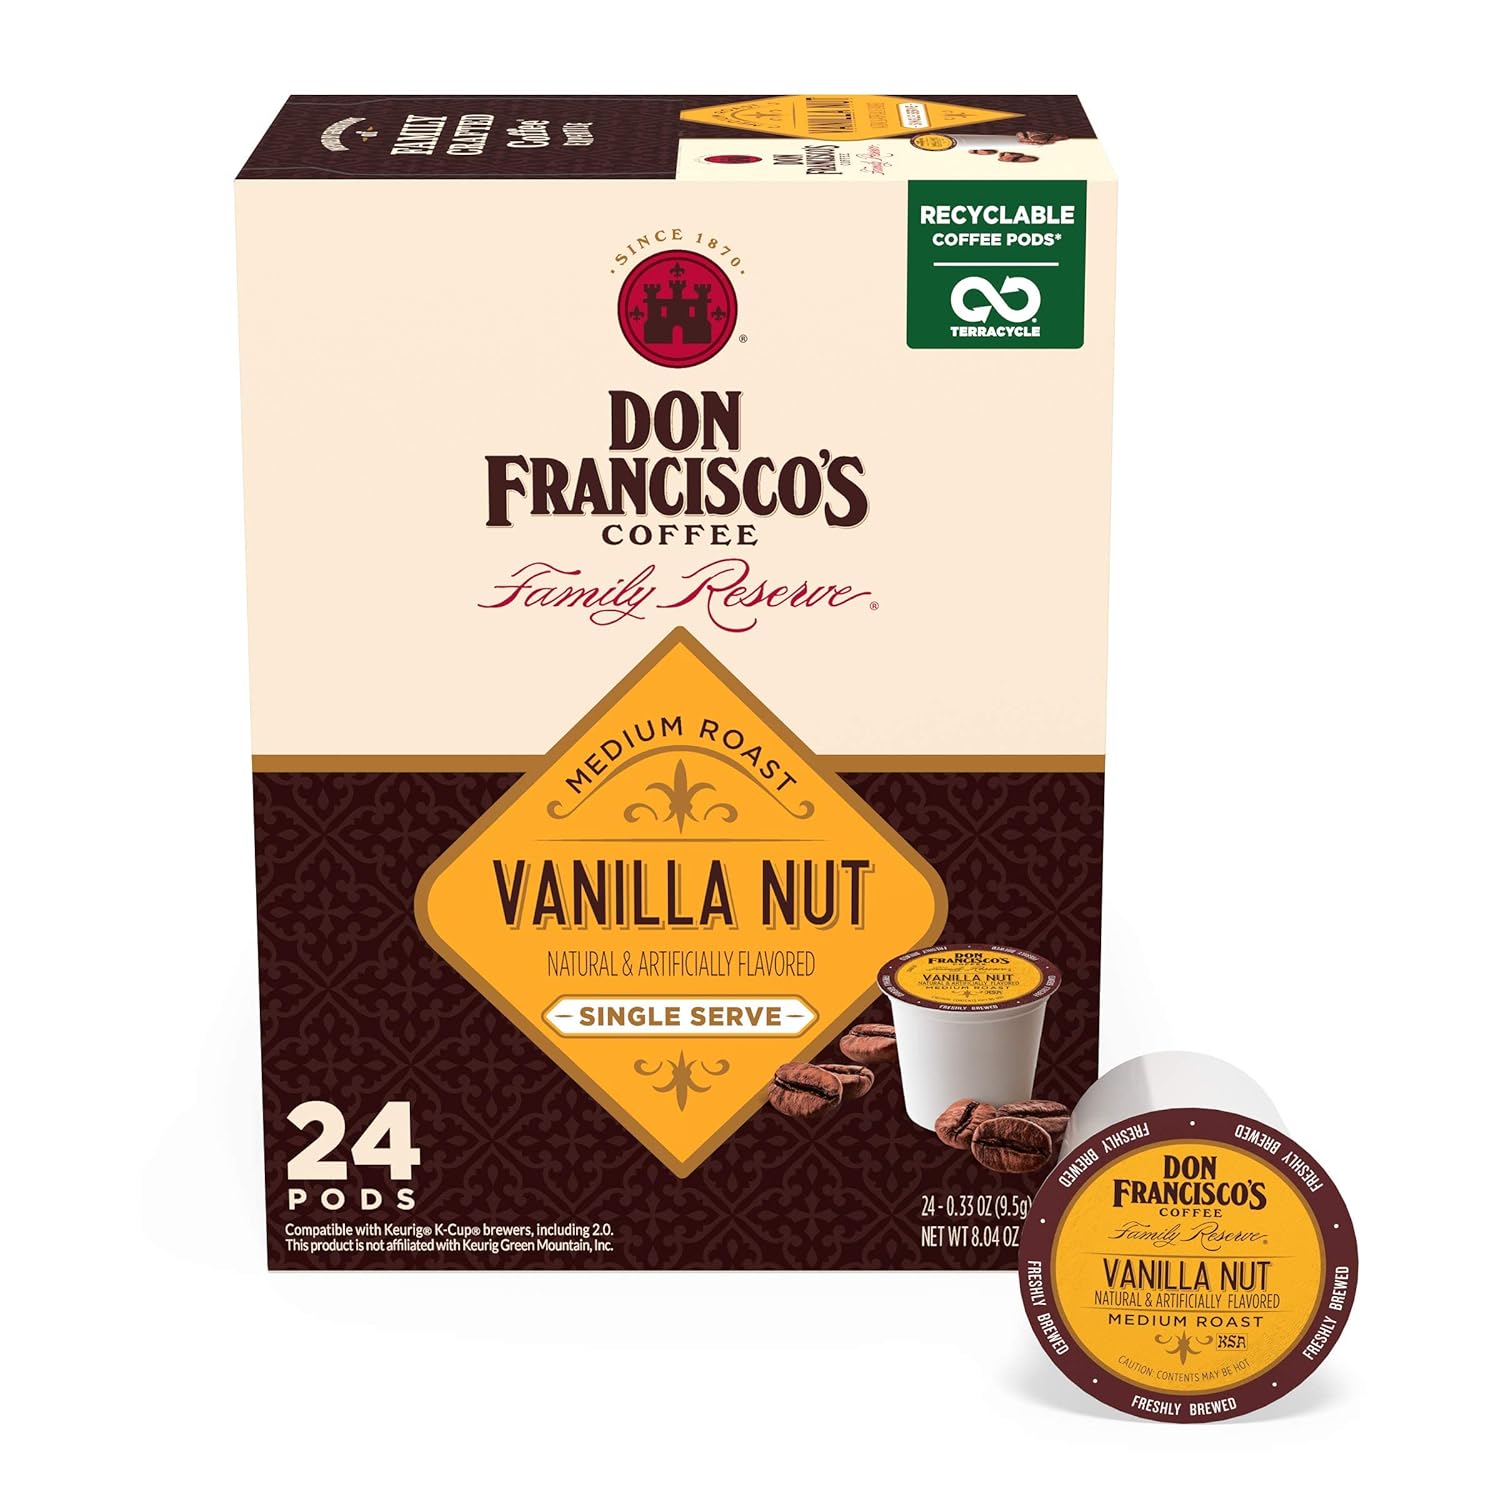 Don Francisco's Vanilla Nut Flavored Medium Roast Coffee Pods - 24 Count - Recyclable Single-Serve Coffee Pods, Compatible with your K- Cup Keurig Coffee Maker